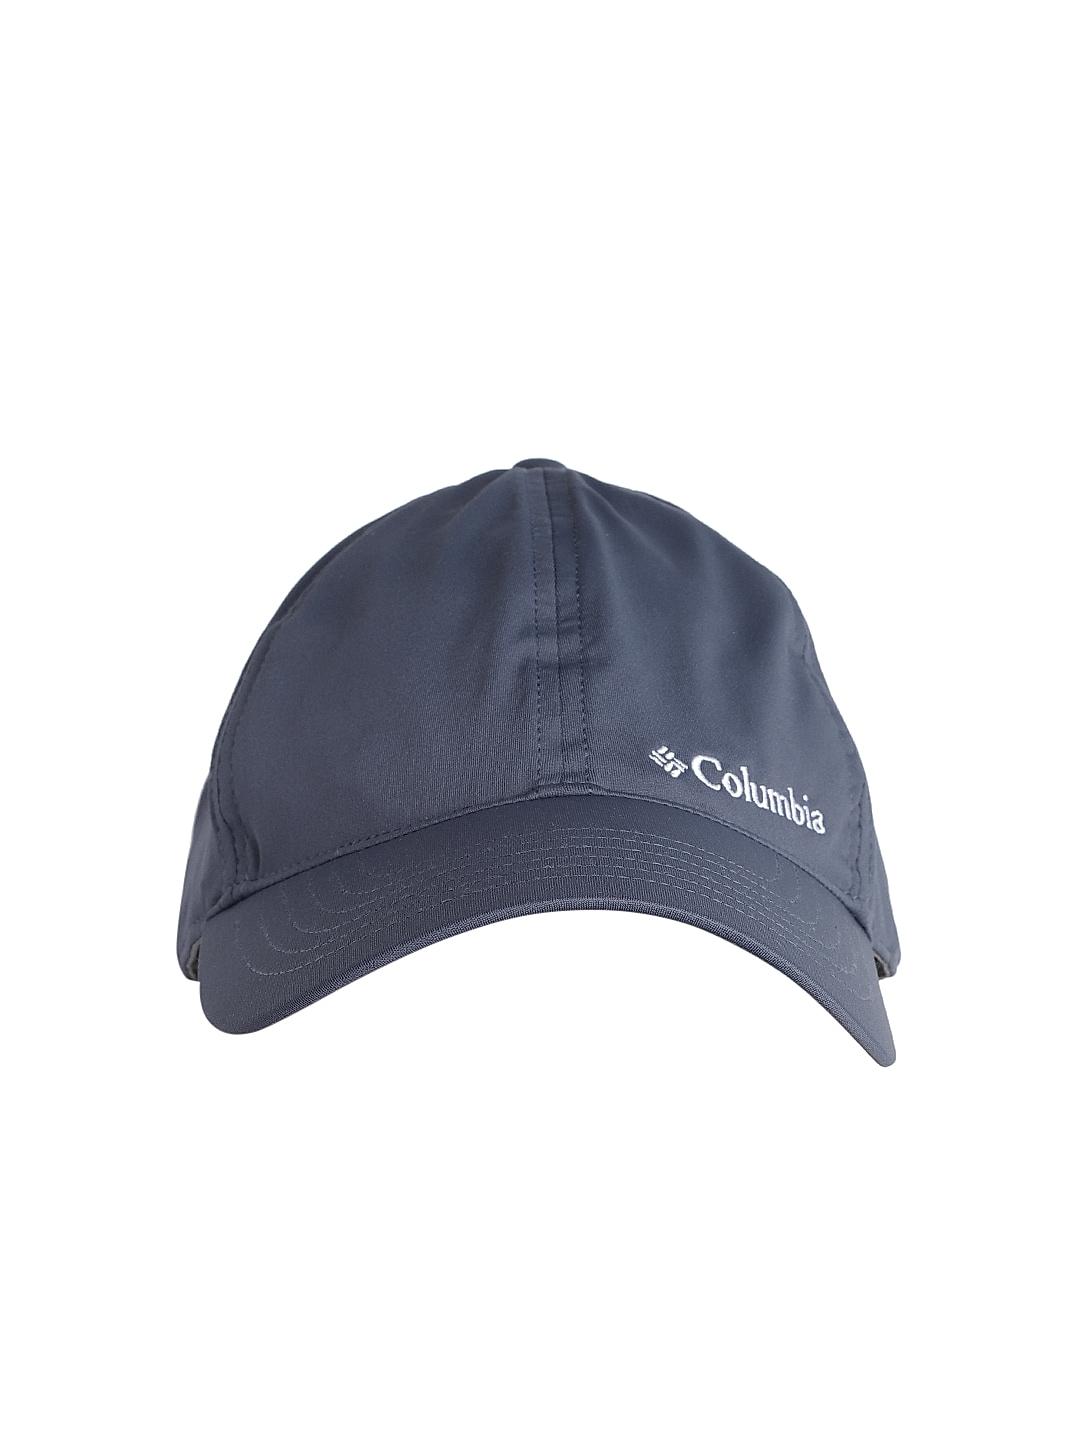 Buy Blue Coolhead Ii Ball Cap for Men and Women Online at Columbia